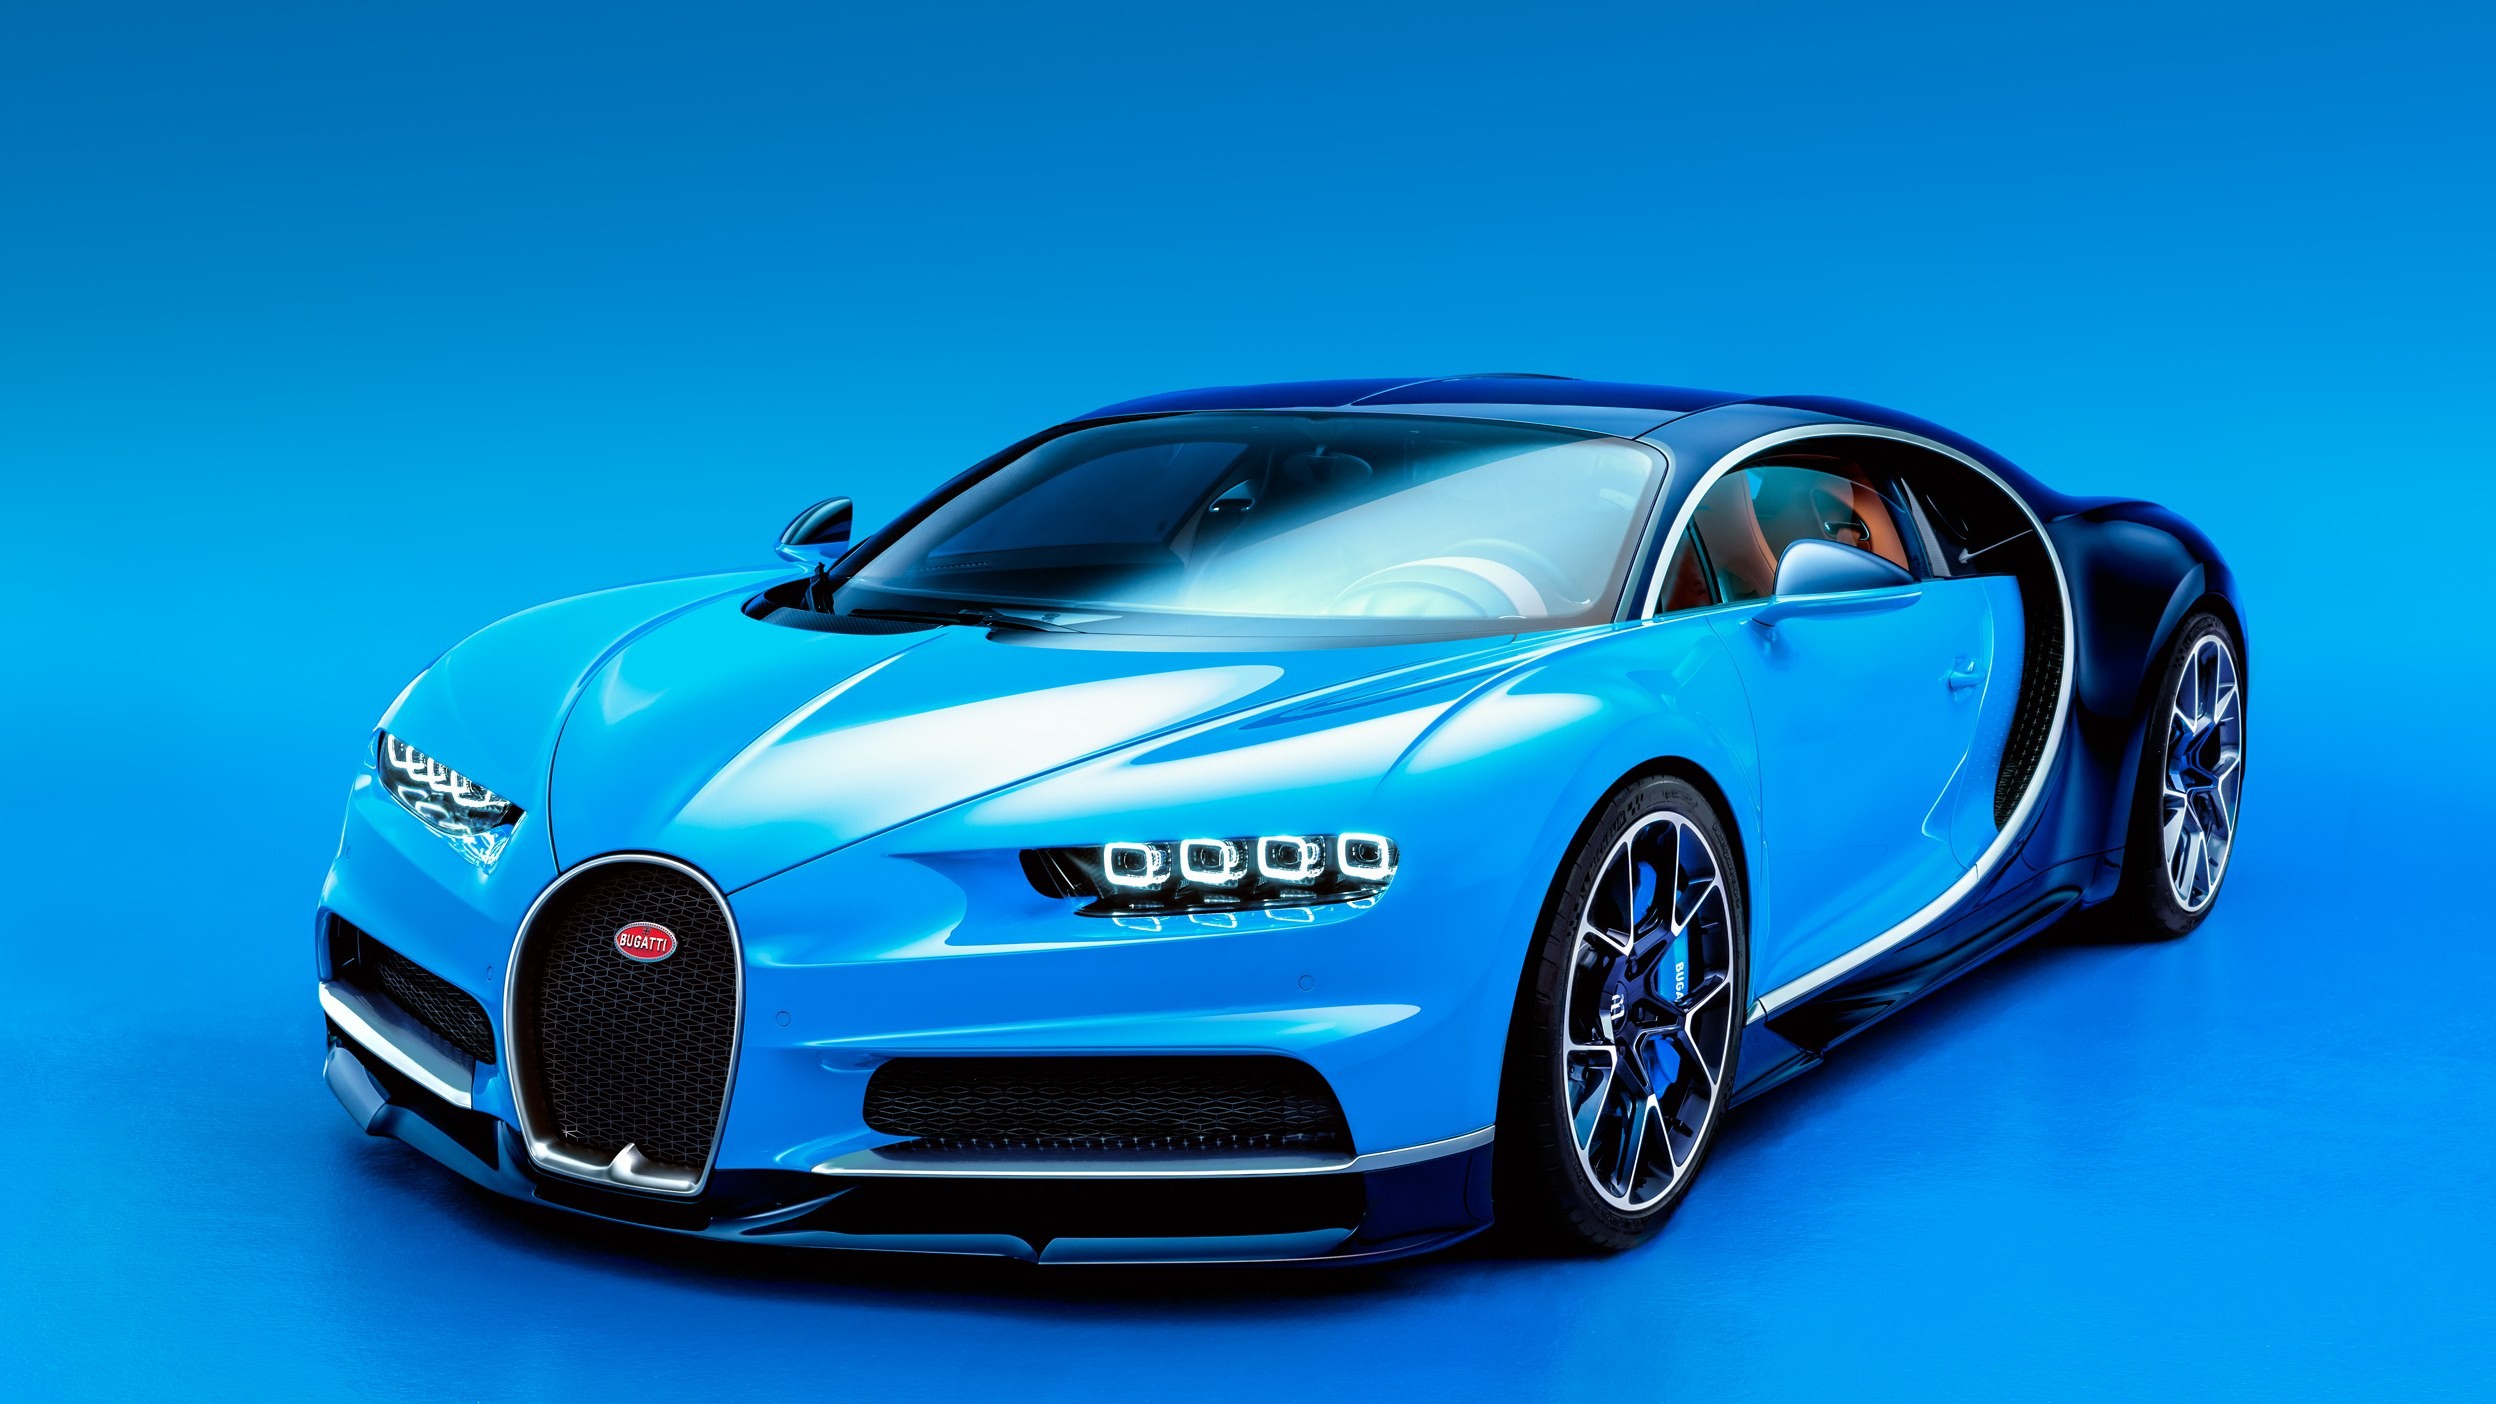 Bugatti Veyron Engine Diagram How Bugatti Crafted the Chiron the World S Last Truly Great Car Of Bugatti Veyron Engine Diagram